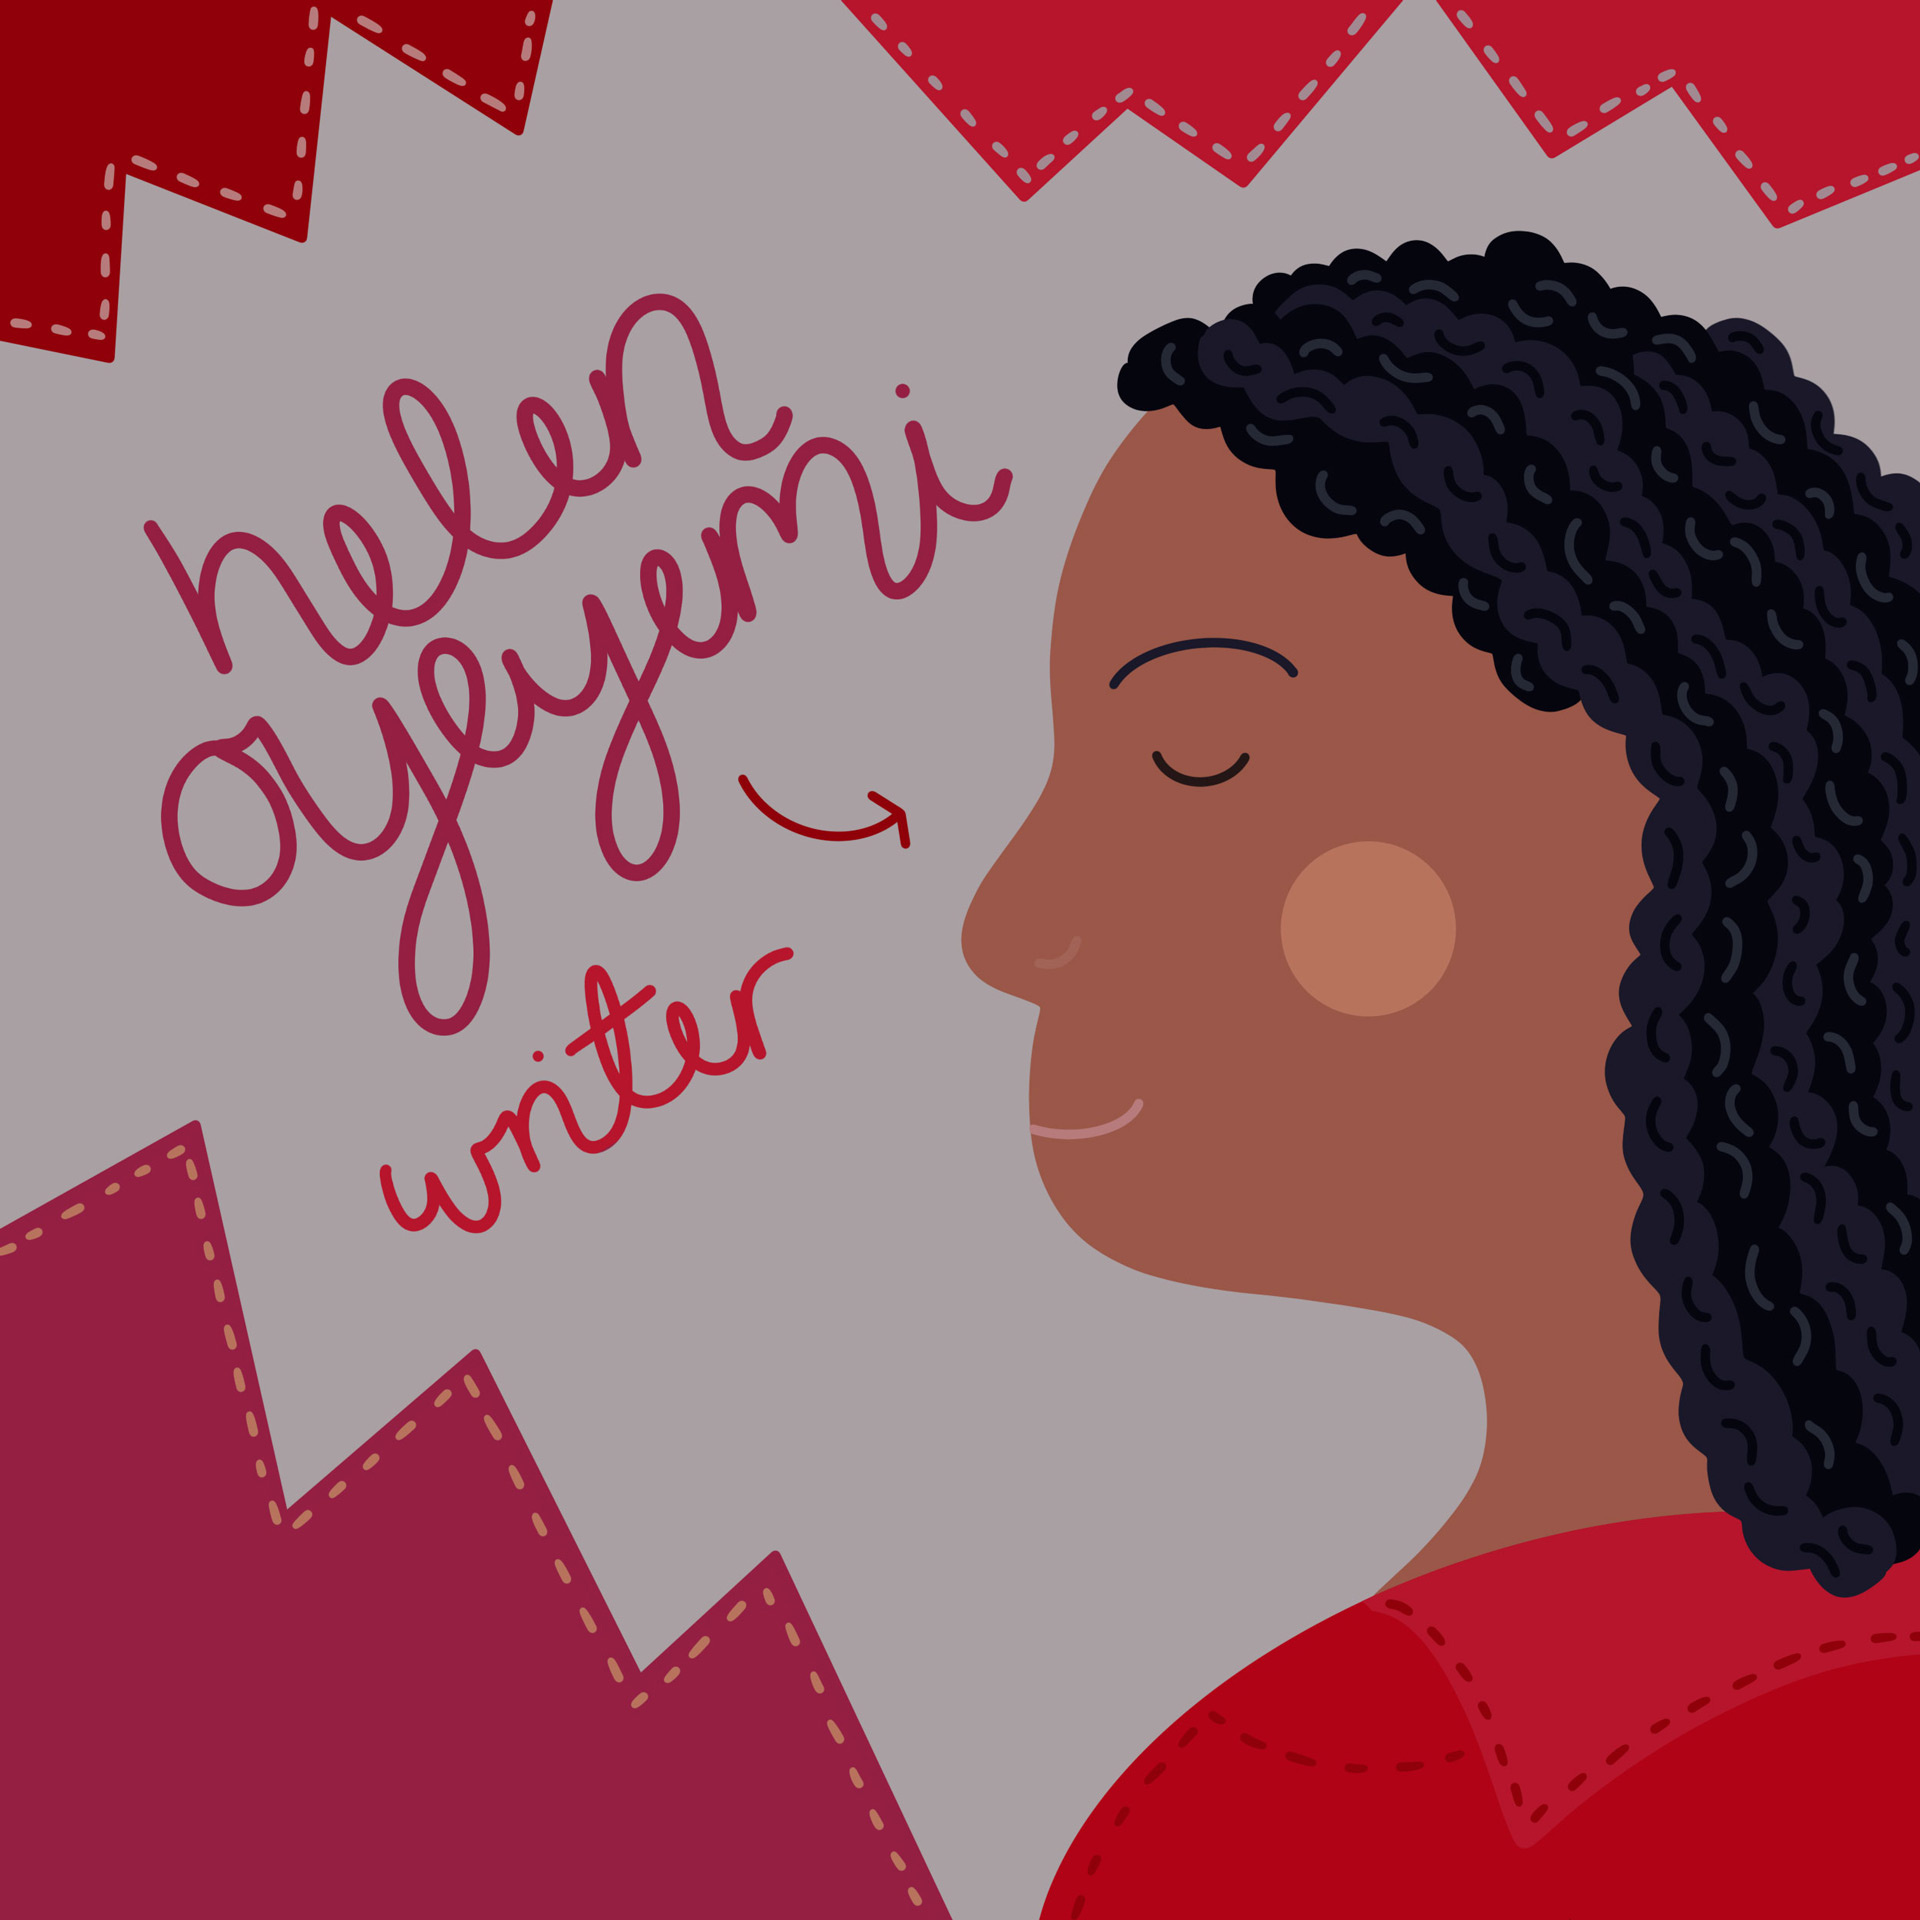 A side-profile portrait of Helen Oyeyemi illustrated in a whimsical and playful illustration style. Helen is depicted at the right of the square image, surrounded by zig-zag patterns and shapes. A hand-drawn caption accompanies the portrait, stating 'Helen Oyeyemi: Writer'. The illustration features a bold colour palette, blending shades of blue, purple, and burgundy. 